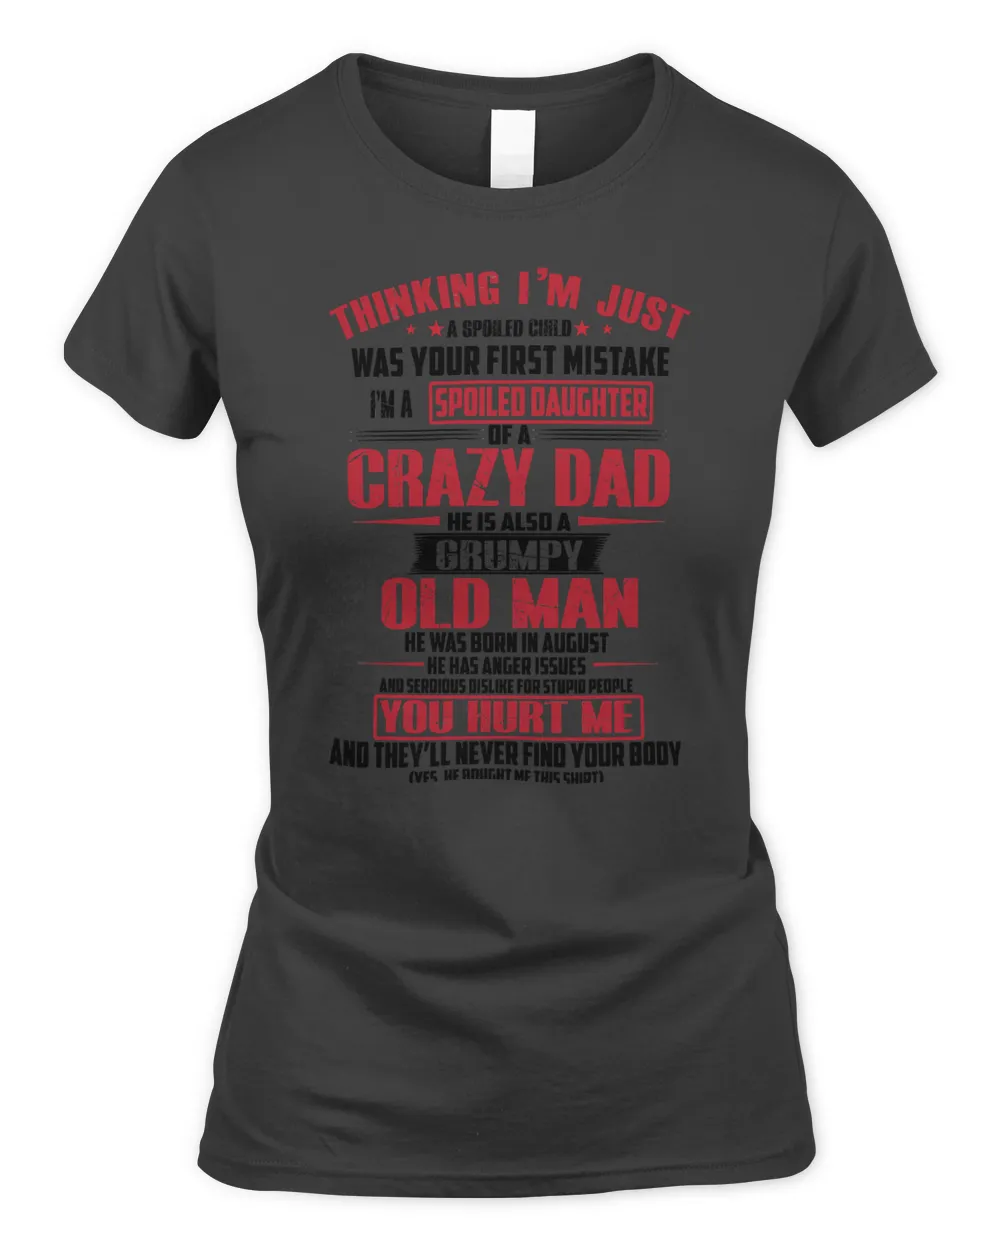 Father SPOILED DAUGHTERCRAZY DAD321 dad